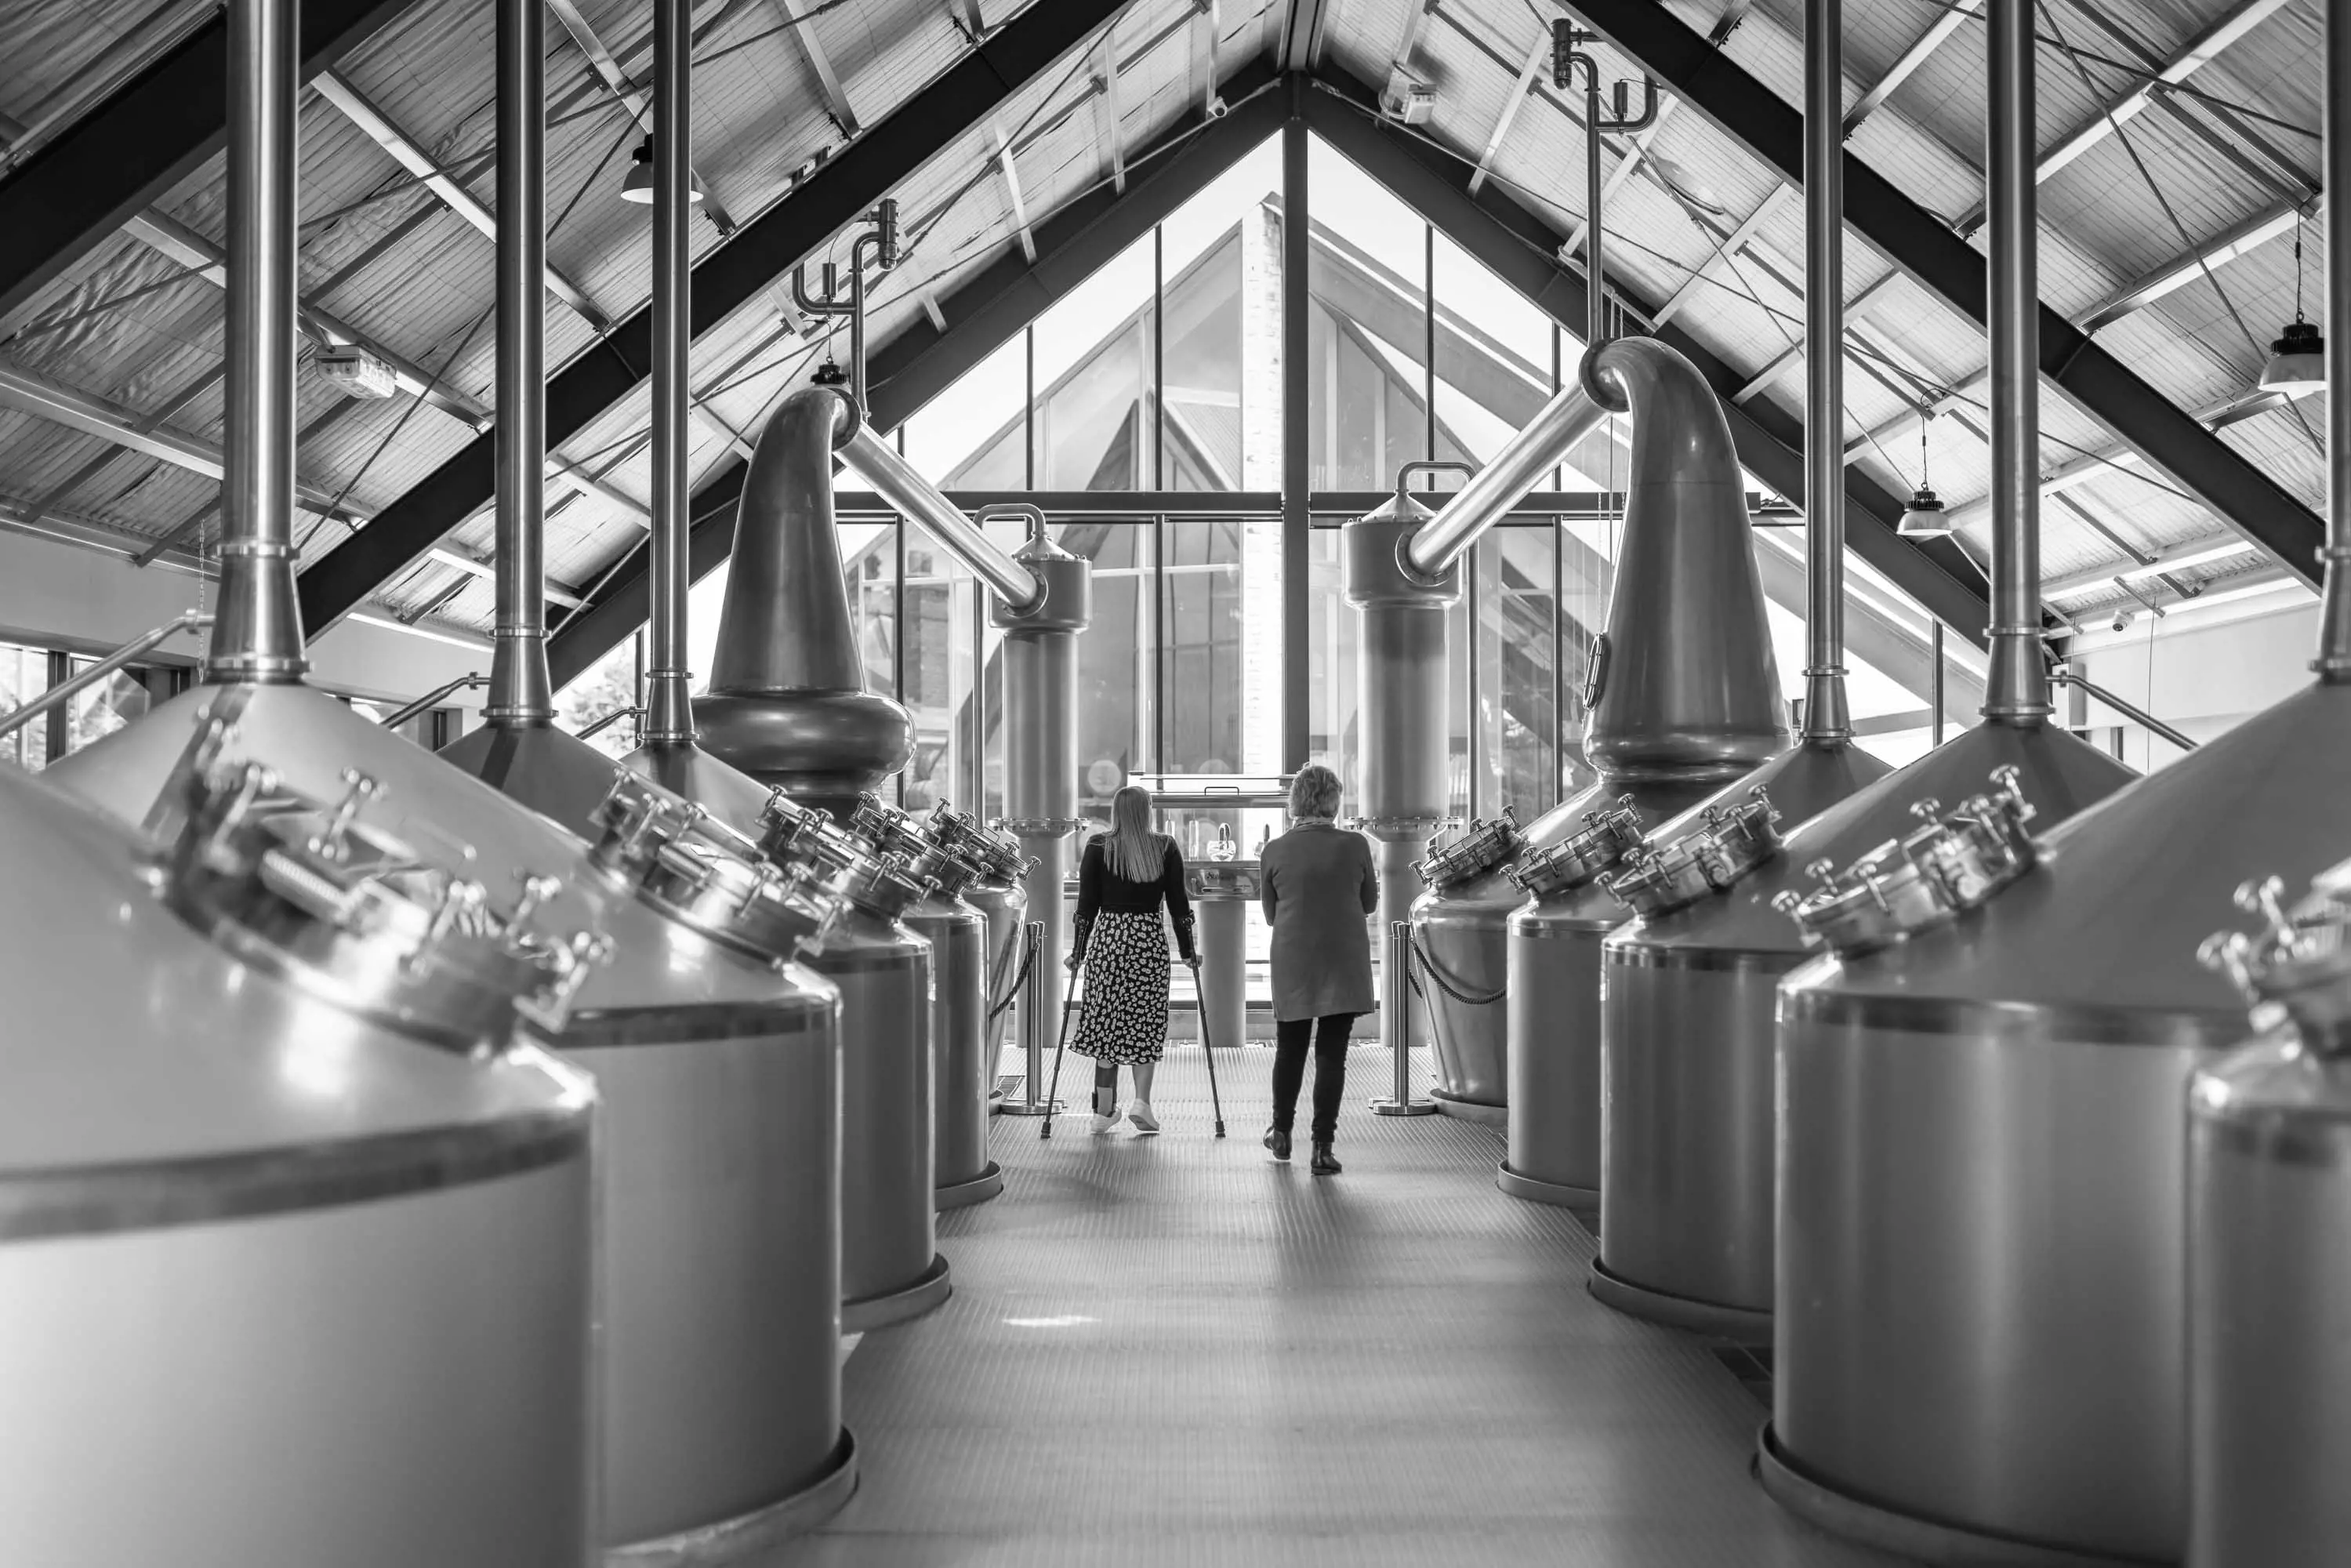 Two people walk between several large distillers housed in a triangular, tall-roofed industrial shed.